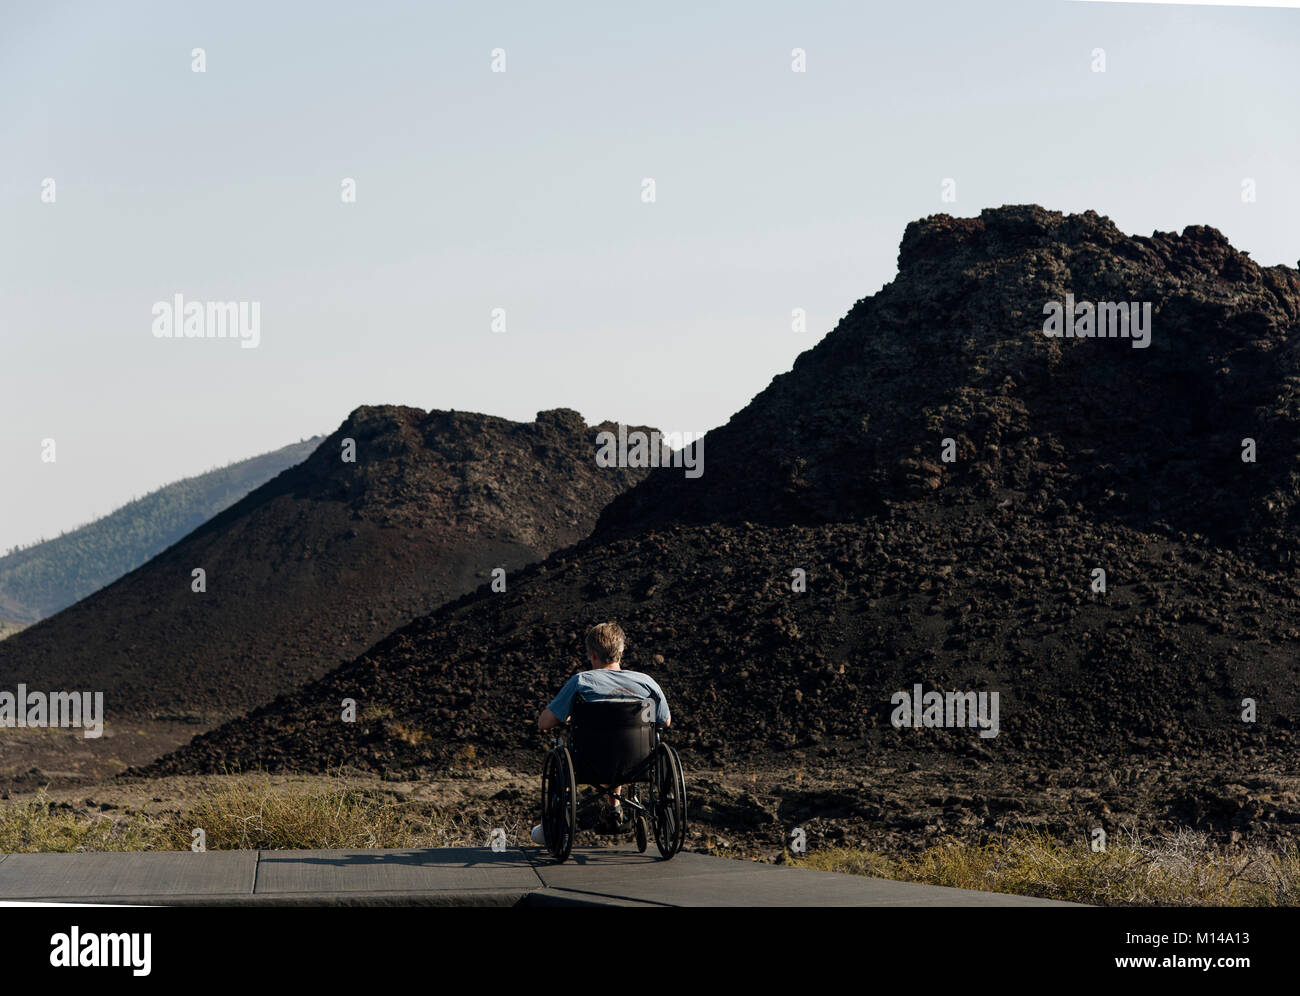 A man in a wheelchair views the spatter cones at Craers of the Moon Natl. Monument, USA.  Fortunately, the top of the first cone is accessible to him. Stock Photo